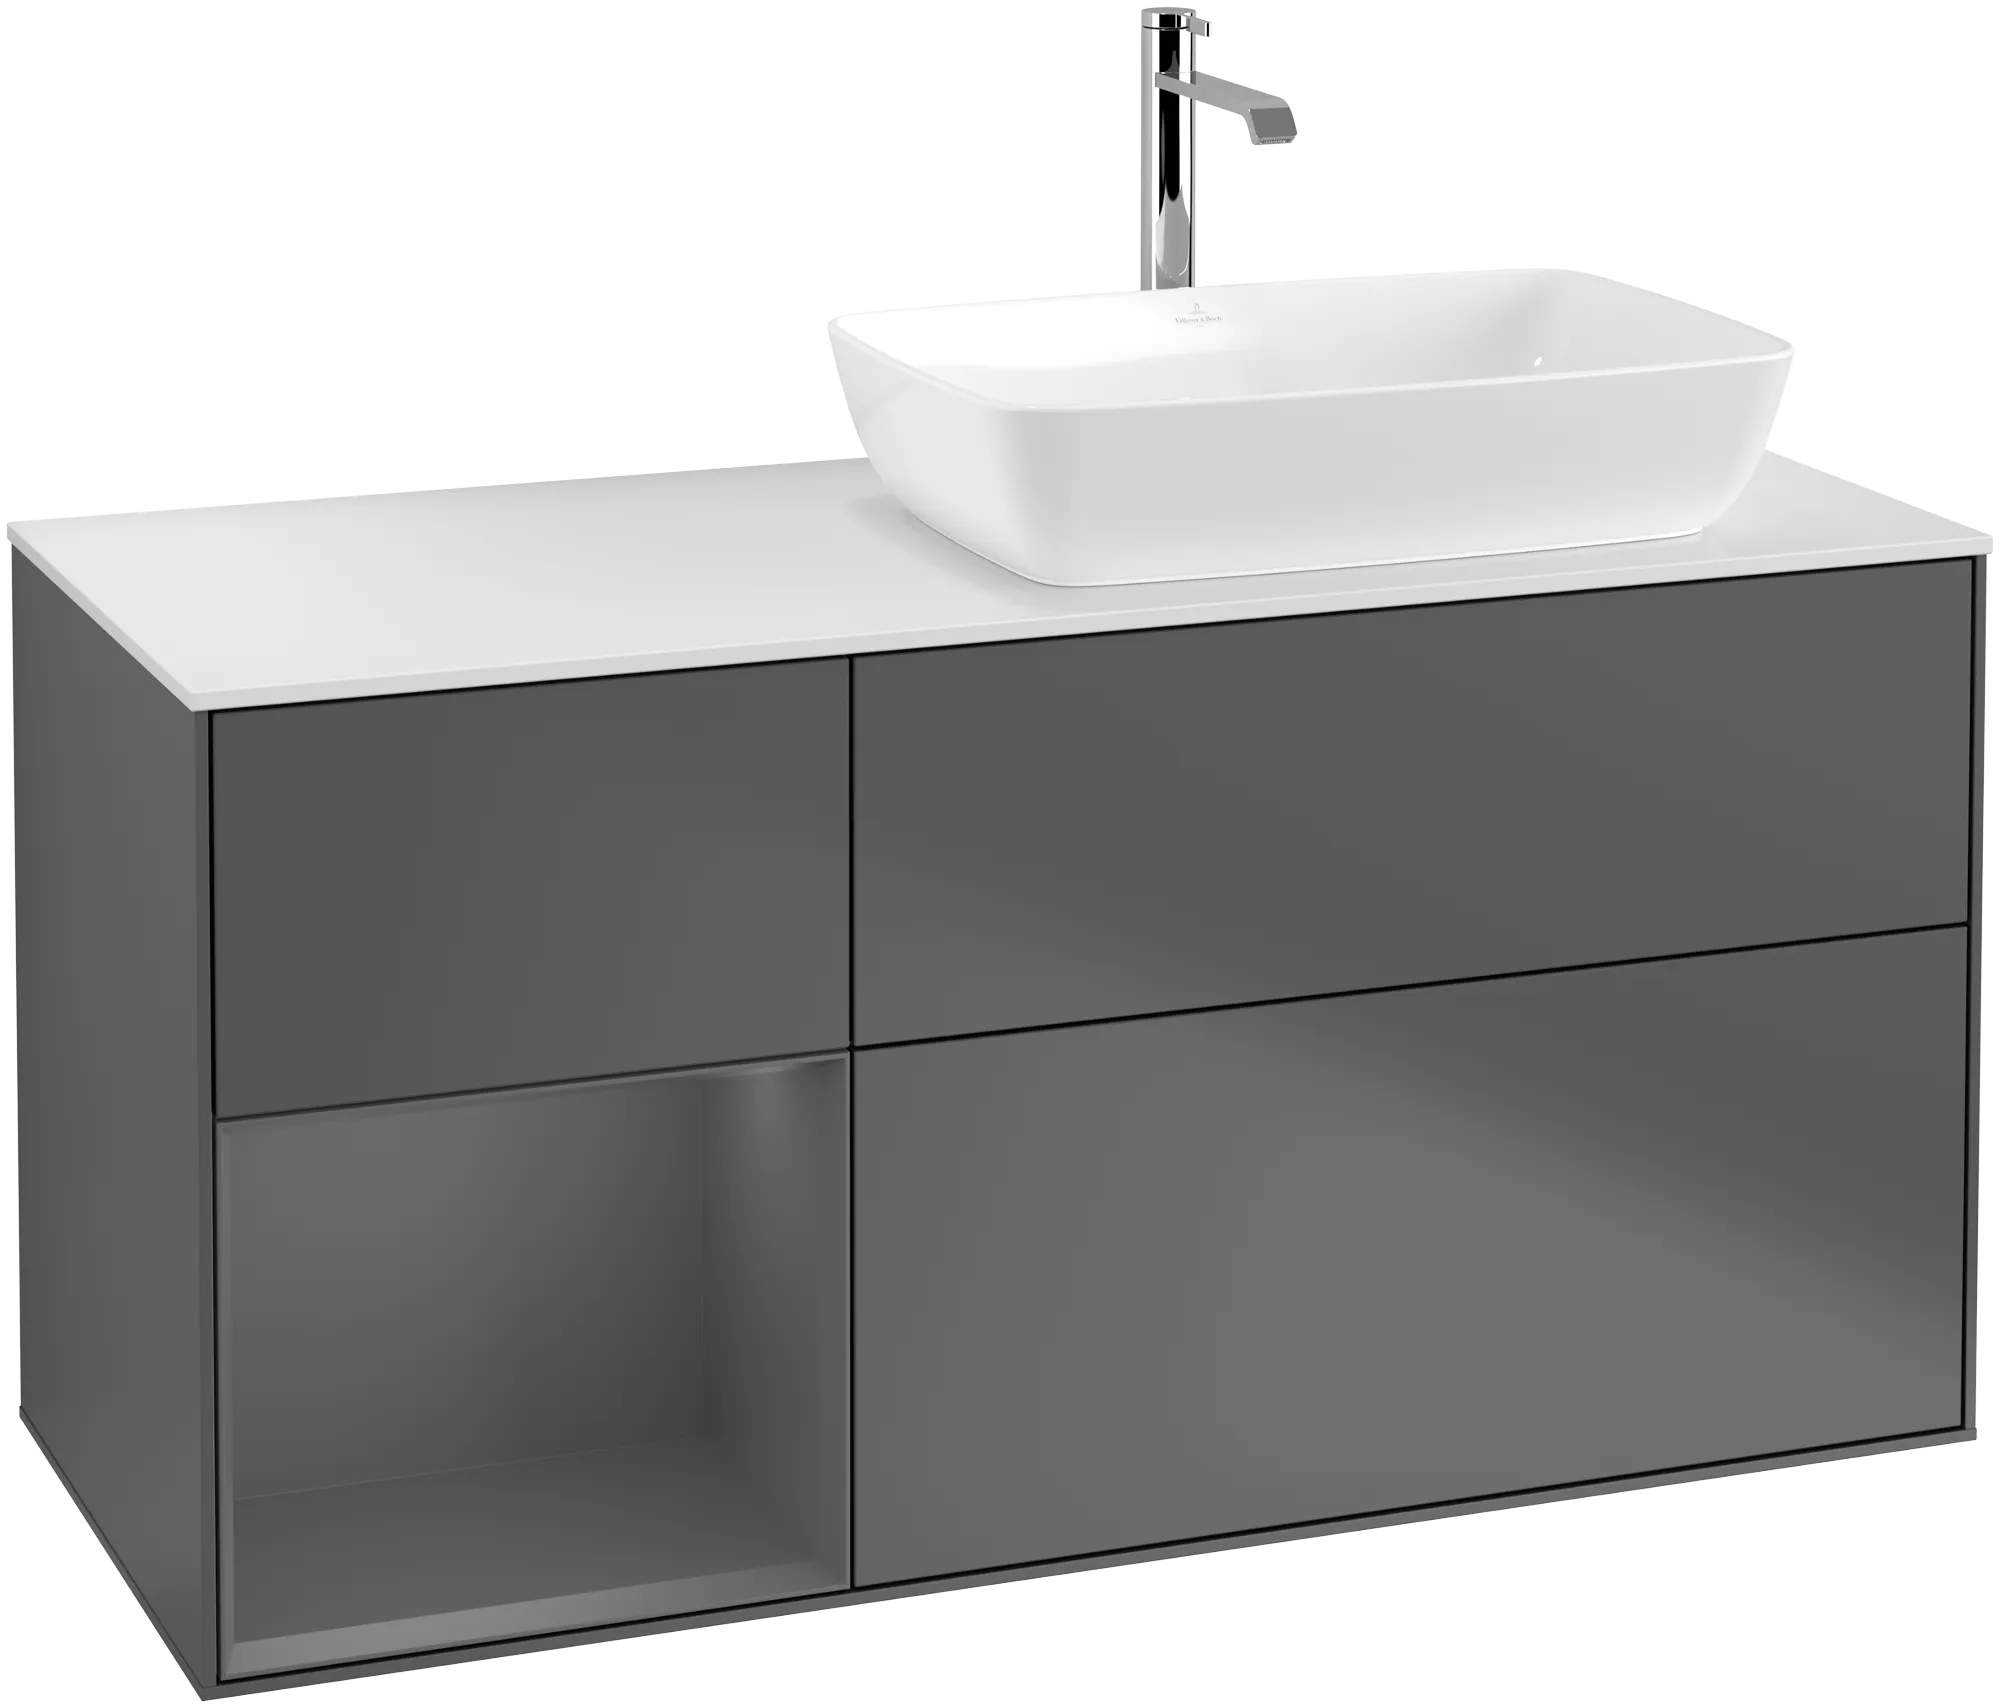 Picture of VILLEROY BOCH Finion Vanity unit, with lighting, 3 pull-out compartments, 1200 x 603 x 501 mm, Anthracite Matt Lacquer / Anthracite Matt Lacquer / Glass White Matt #G801GKGK